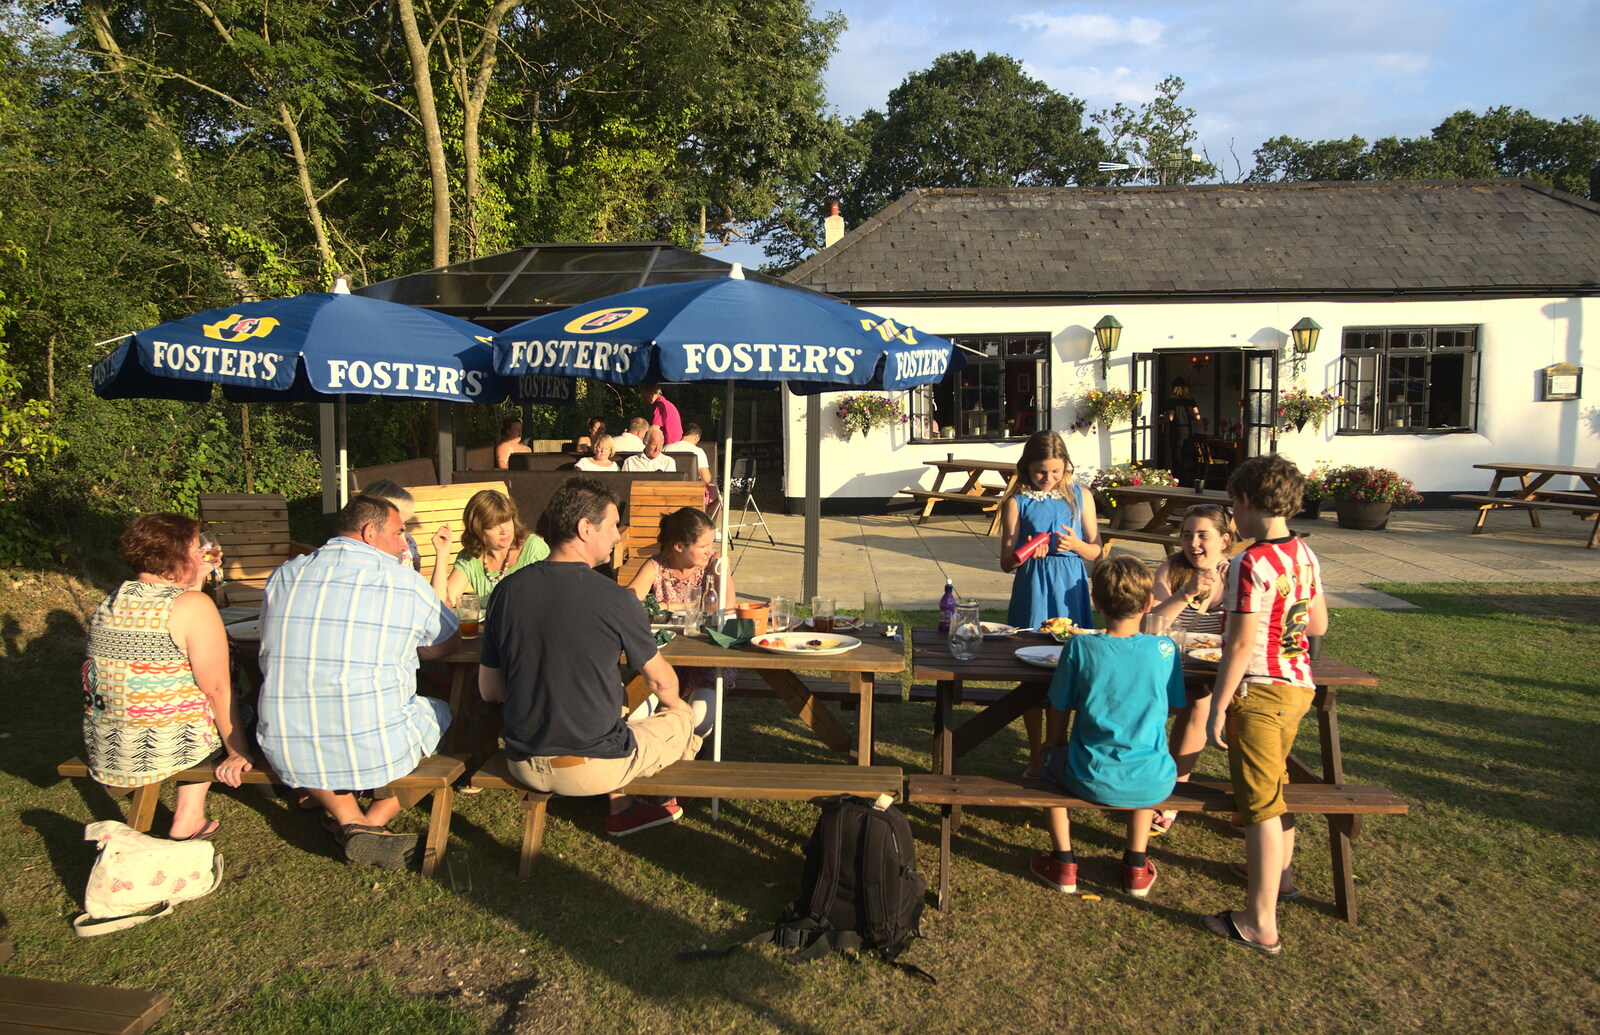 The Plough Inn beer garden from Bob and Bernice's 50th Wedding Anniversary, Hinton Admiral, Dorset - 25th July 2014